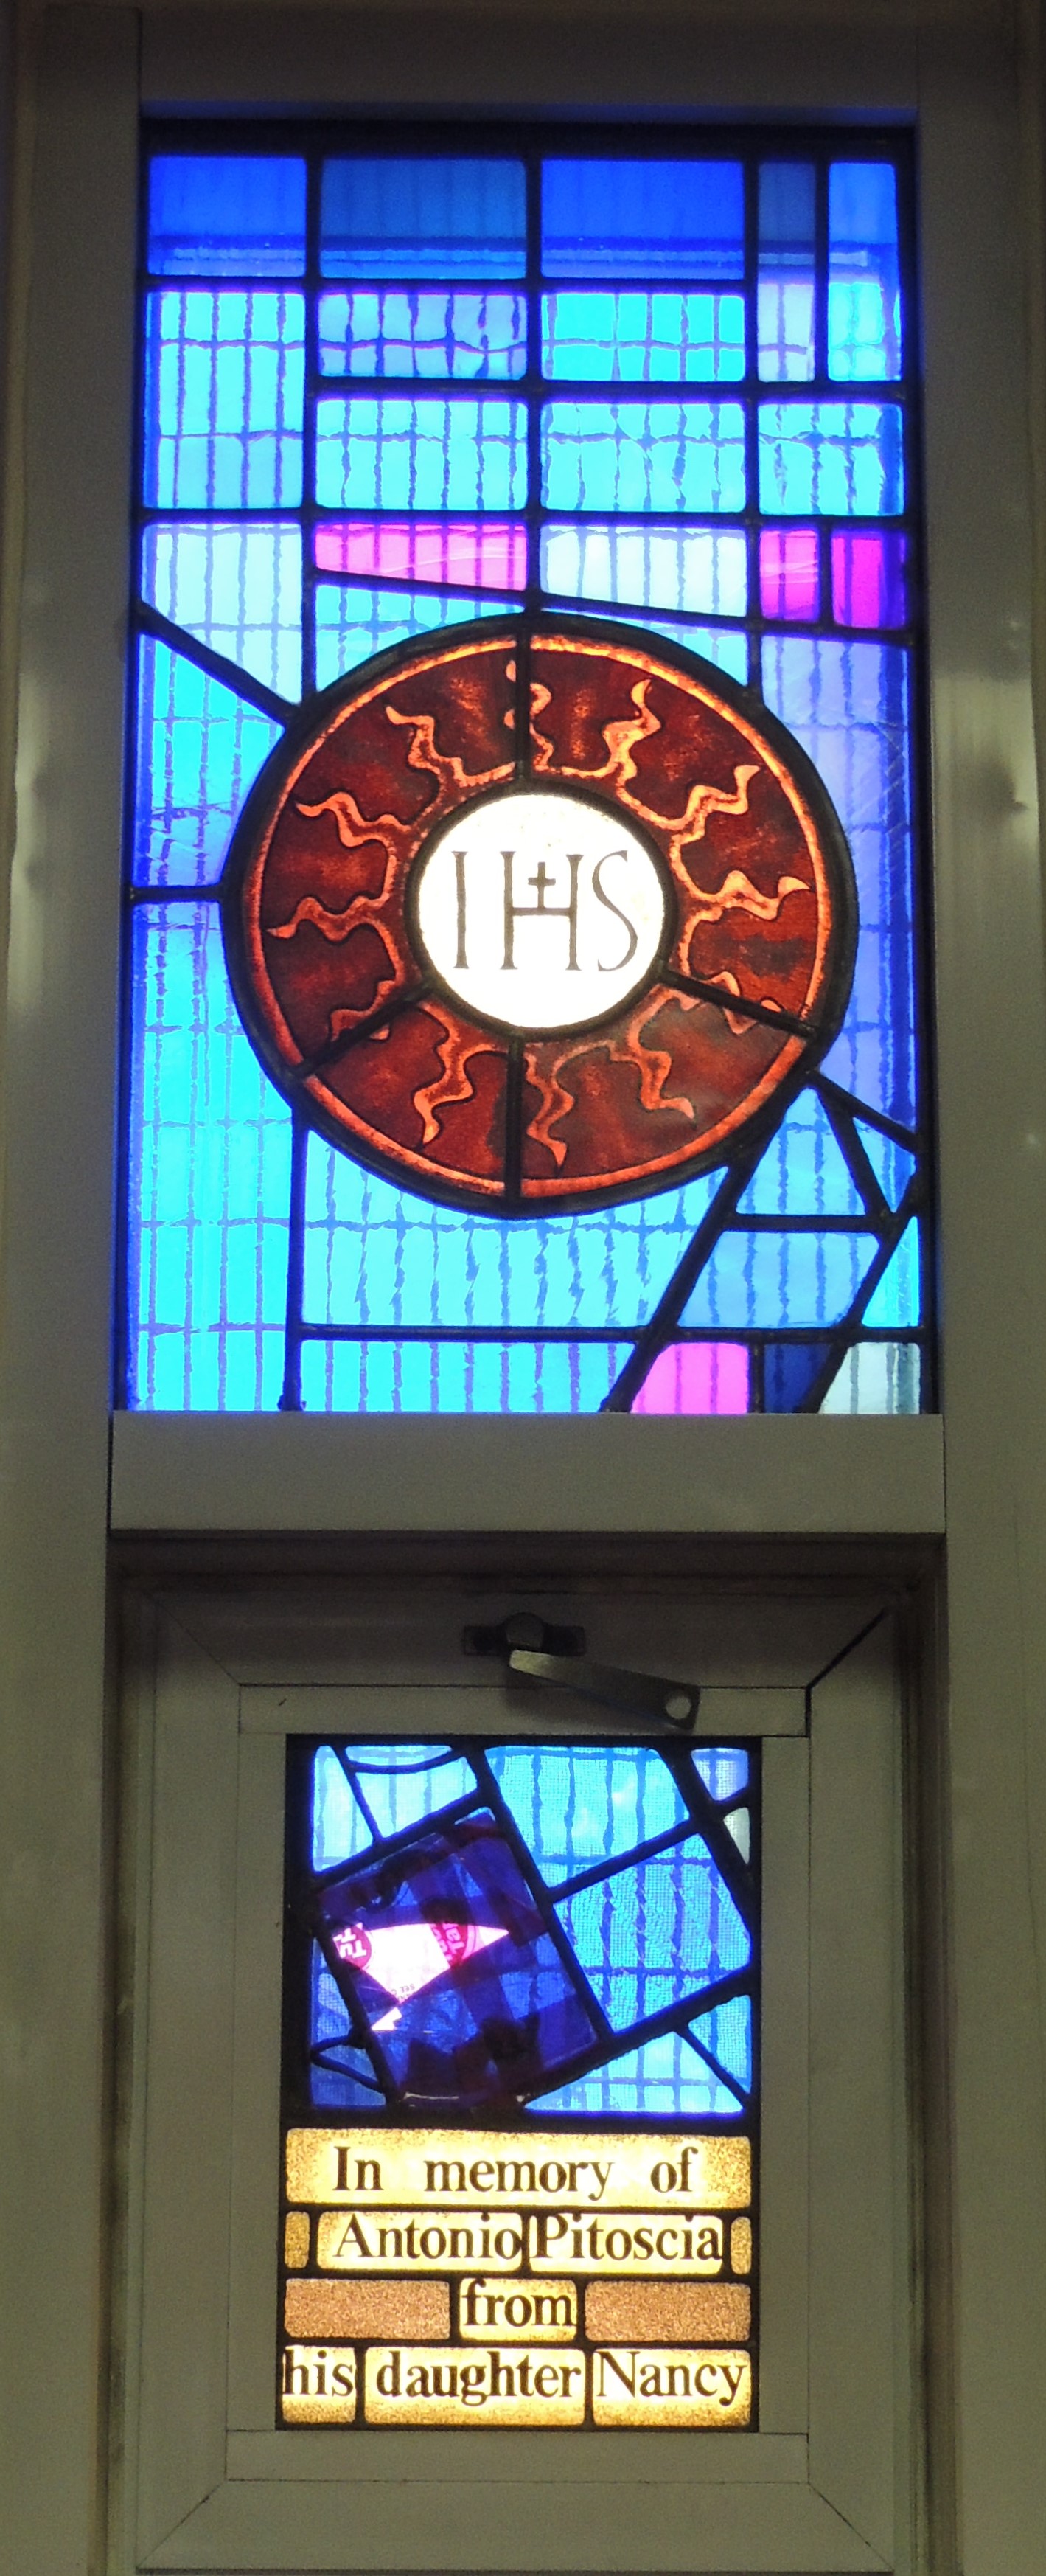 IHS Monogram  - stained glass window